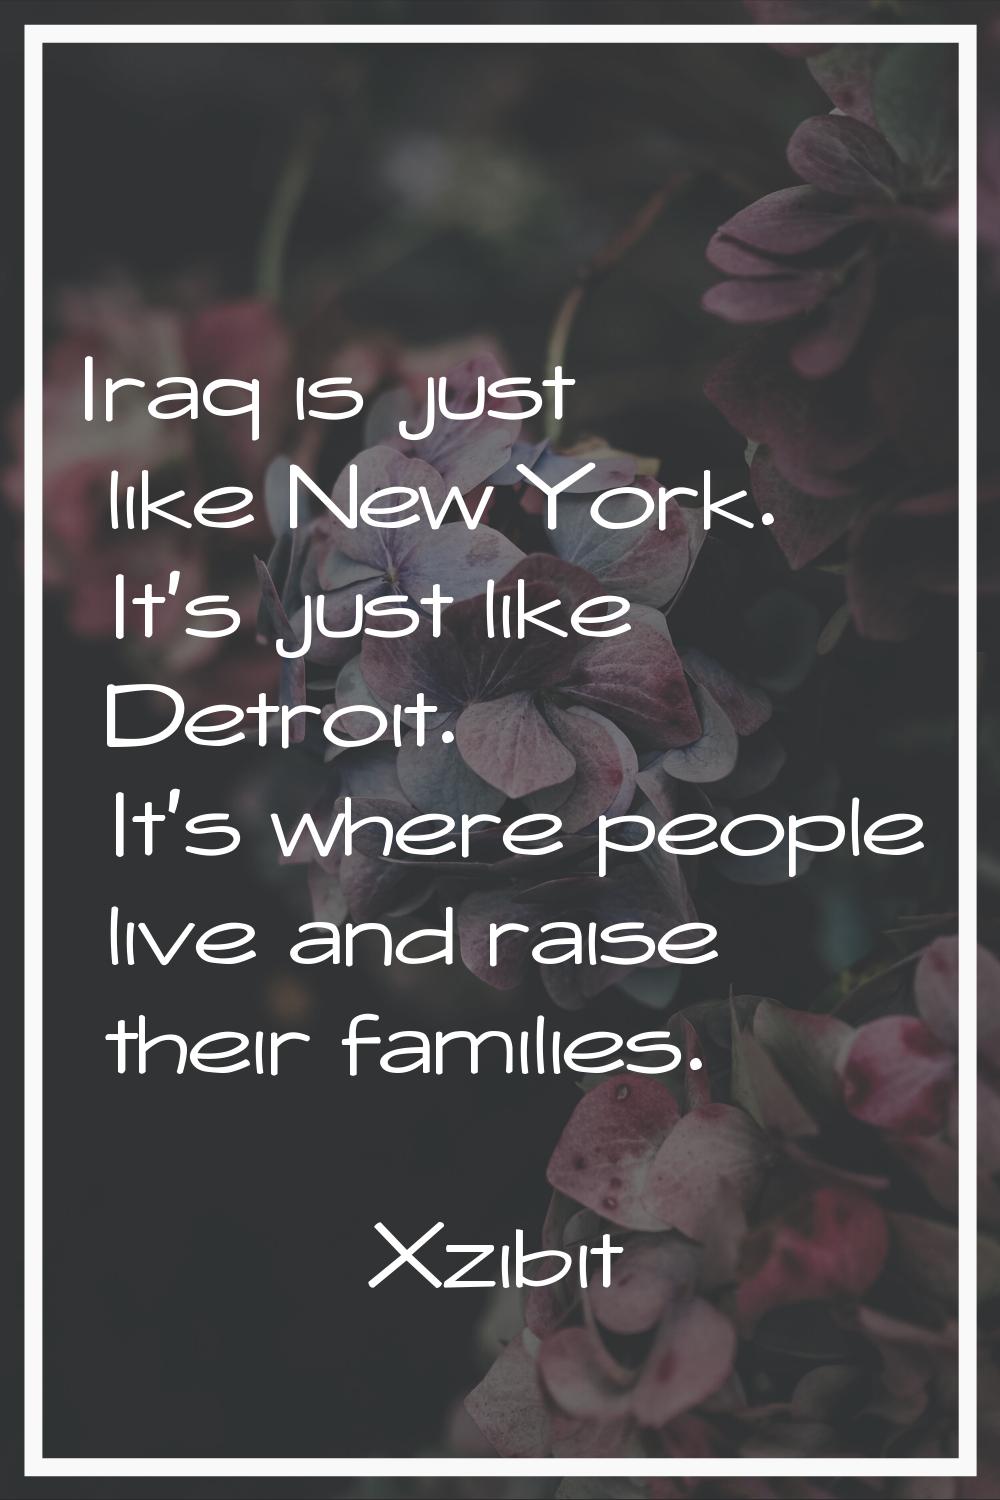 Iraq is just like New York. It's just like Detroit. It's where people live and raise their families